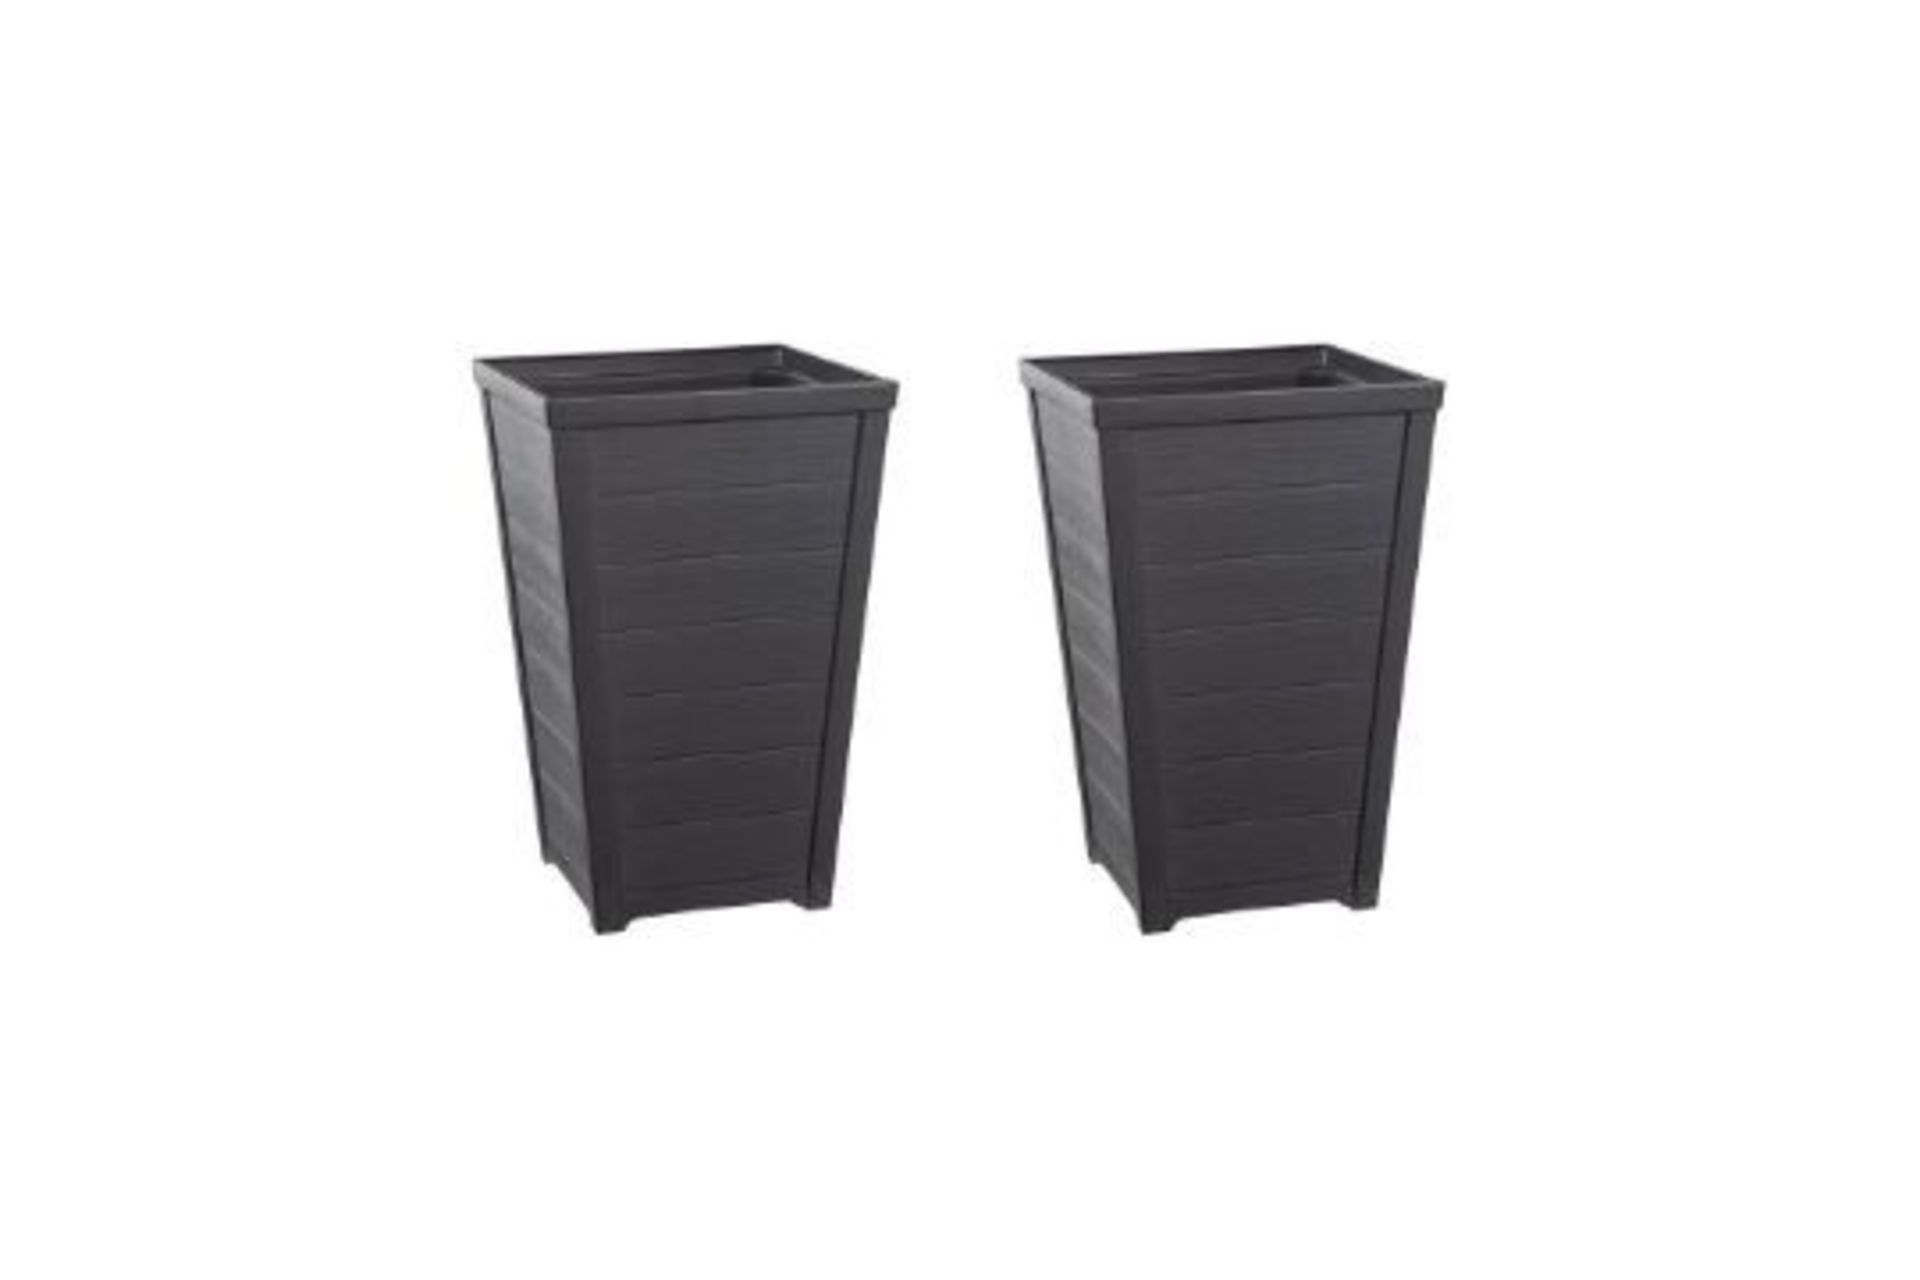 RRP £54 - X2 New Stylish & Durable Large Keter Taper Planters - 43 x 43 x 73cm - Image 2 of 2